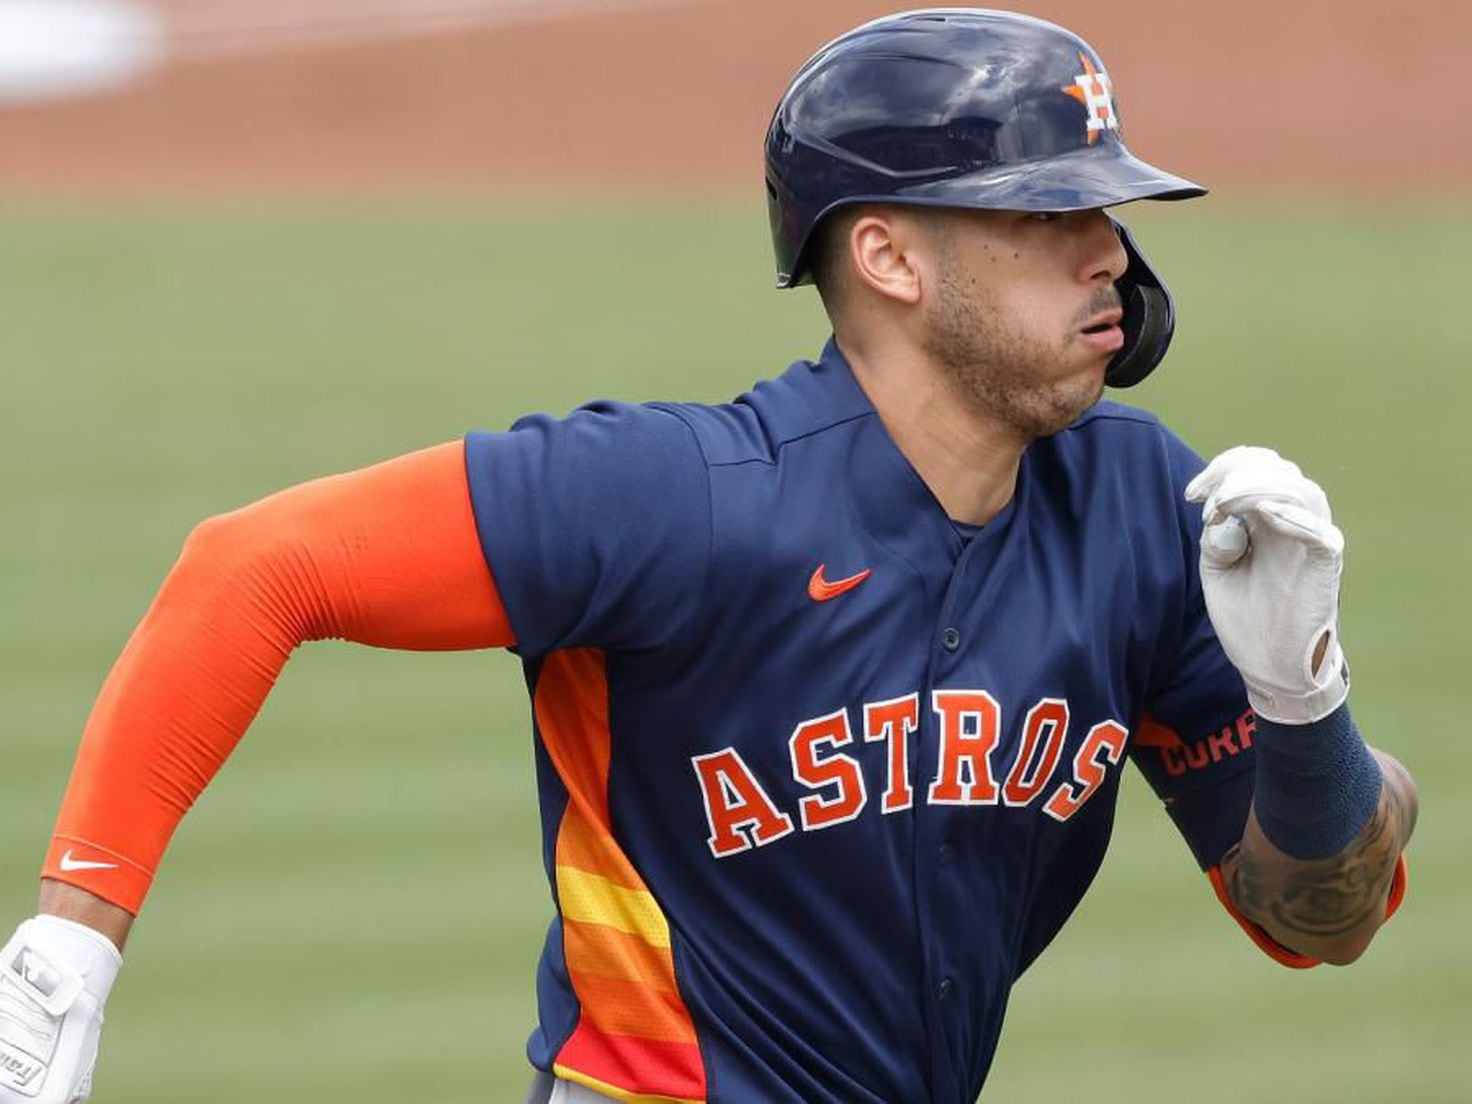 If not Carlos Correa, who plays SS for the New York Yankees?